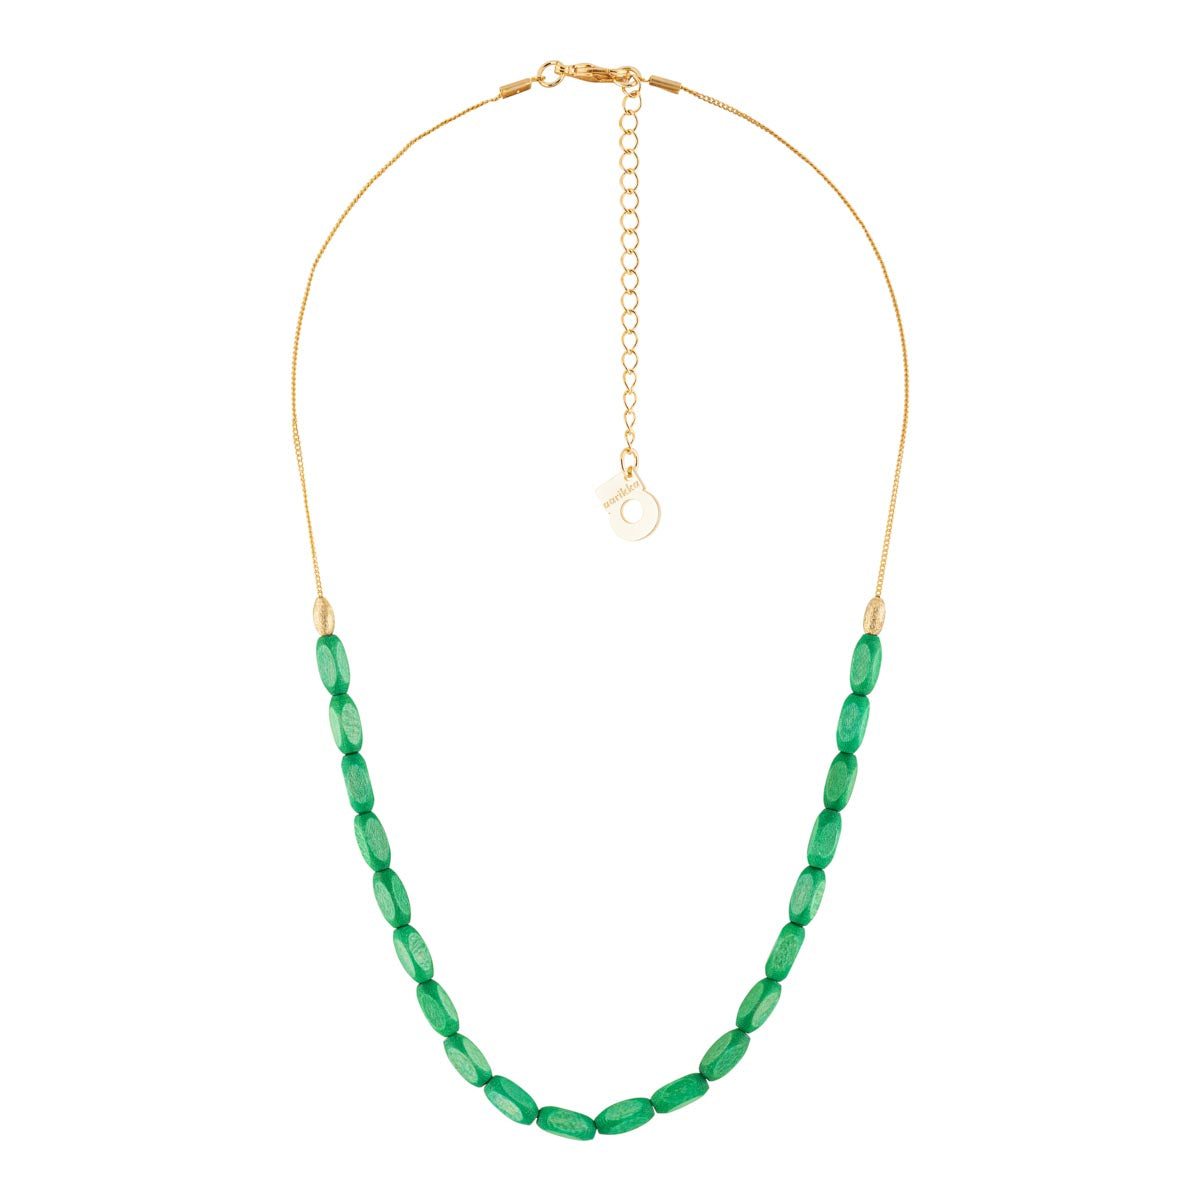 Elvira necklace, green and gold